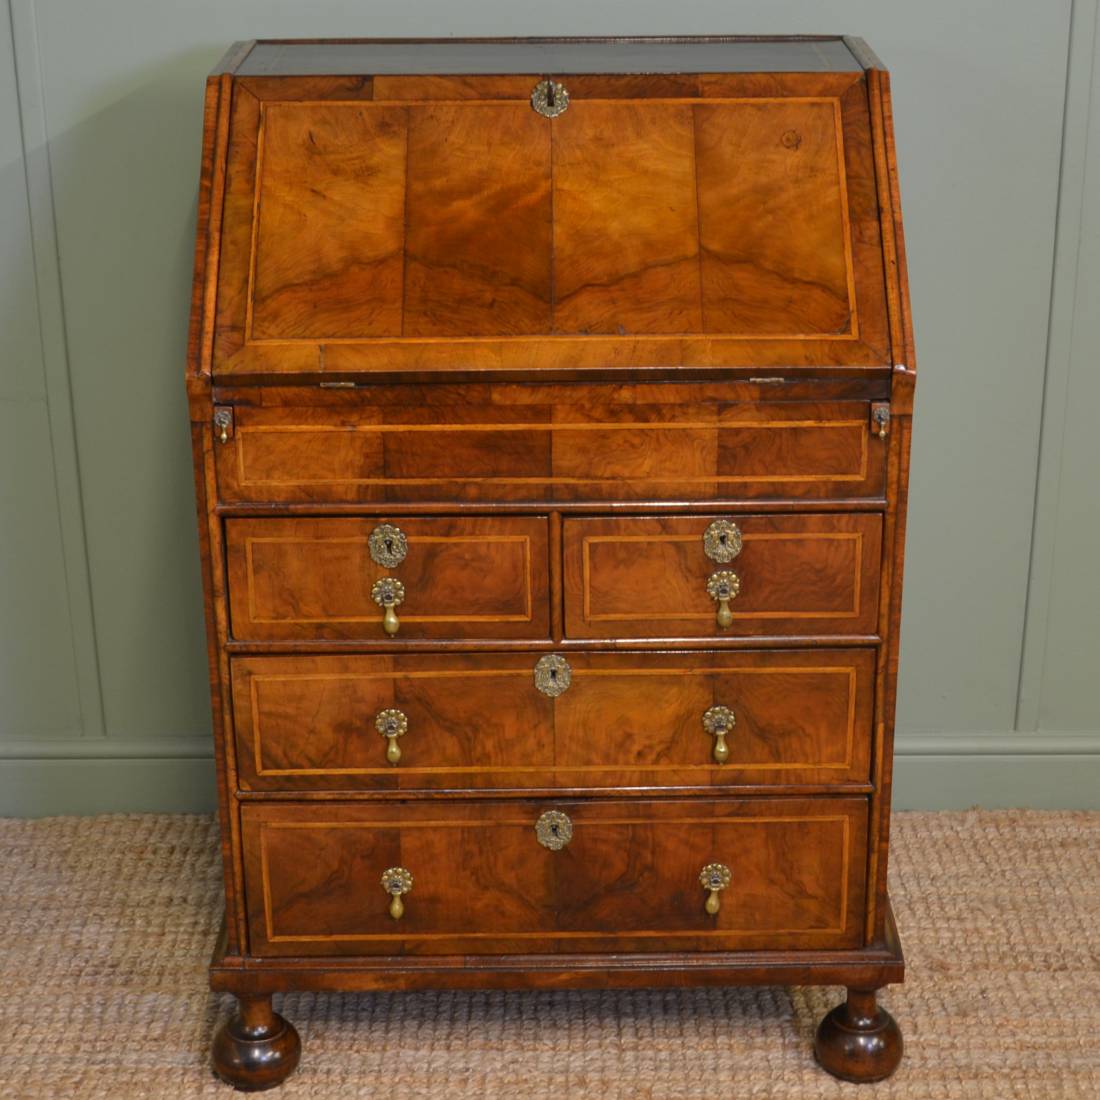 Fine Queen Anne Figured Walnut & Feather Banded Bureau of Superb Small Proportions